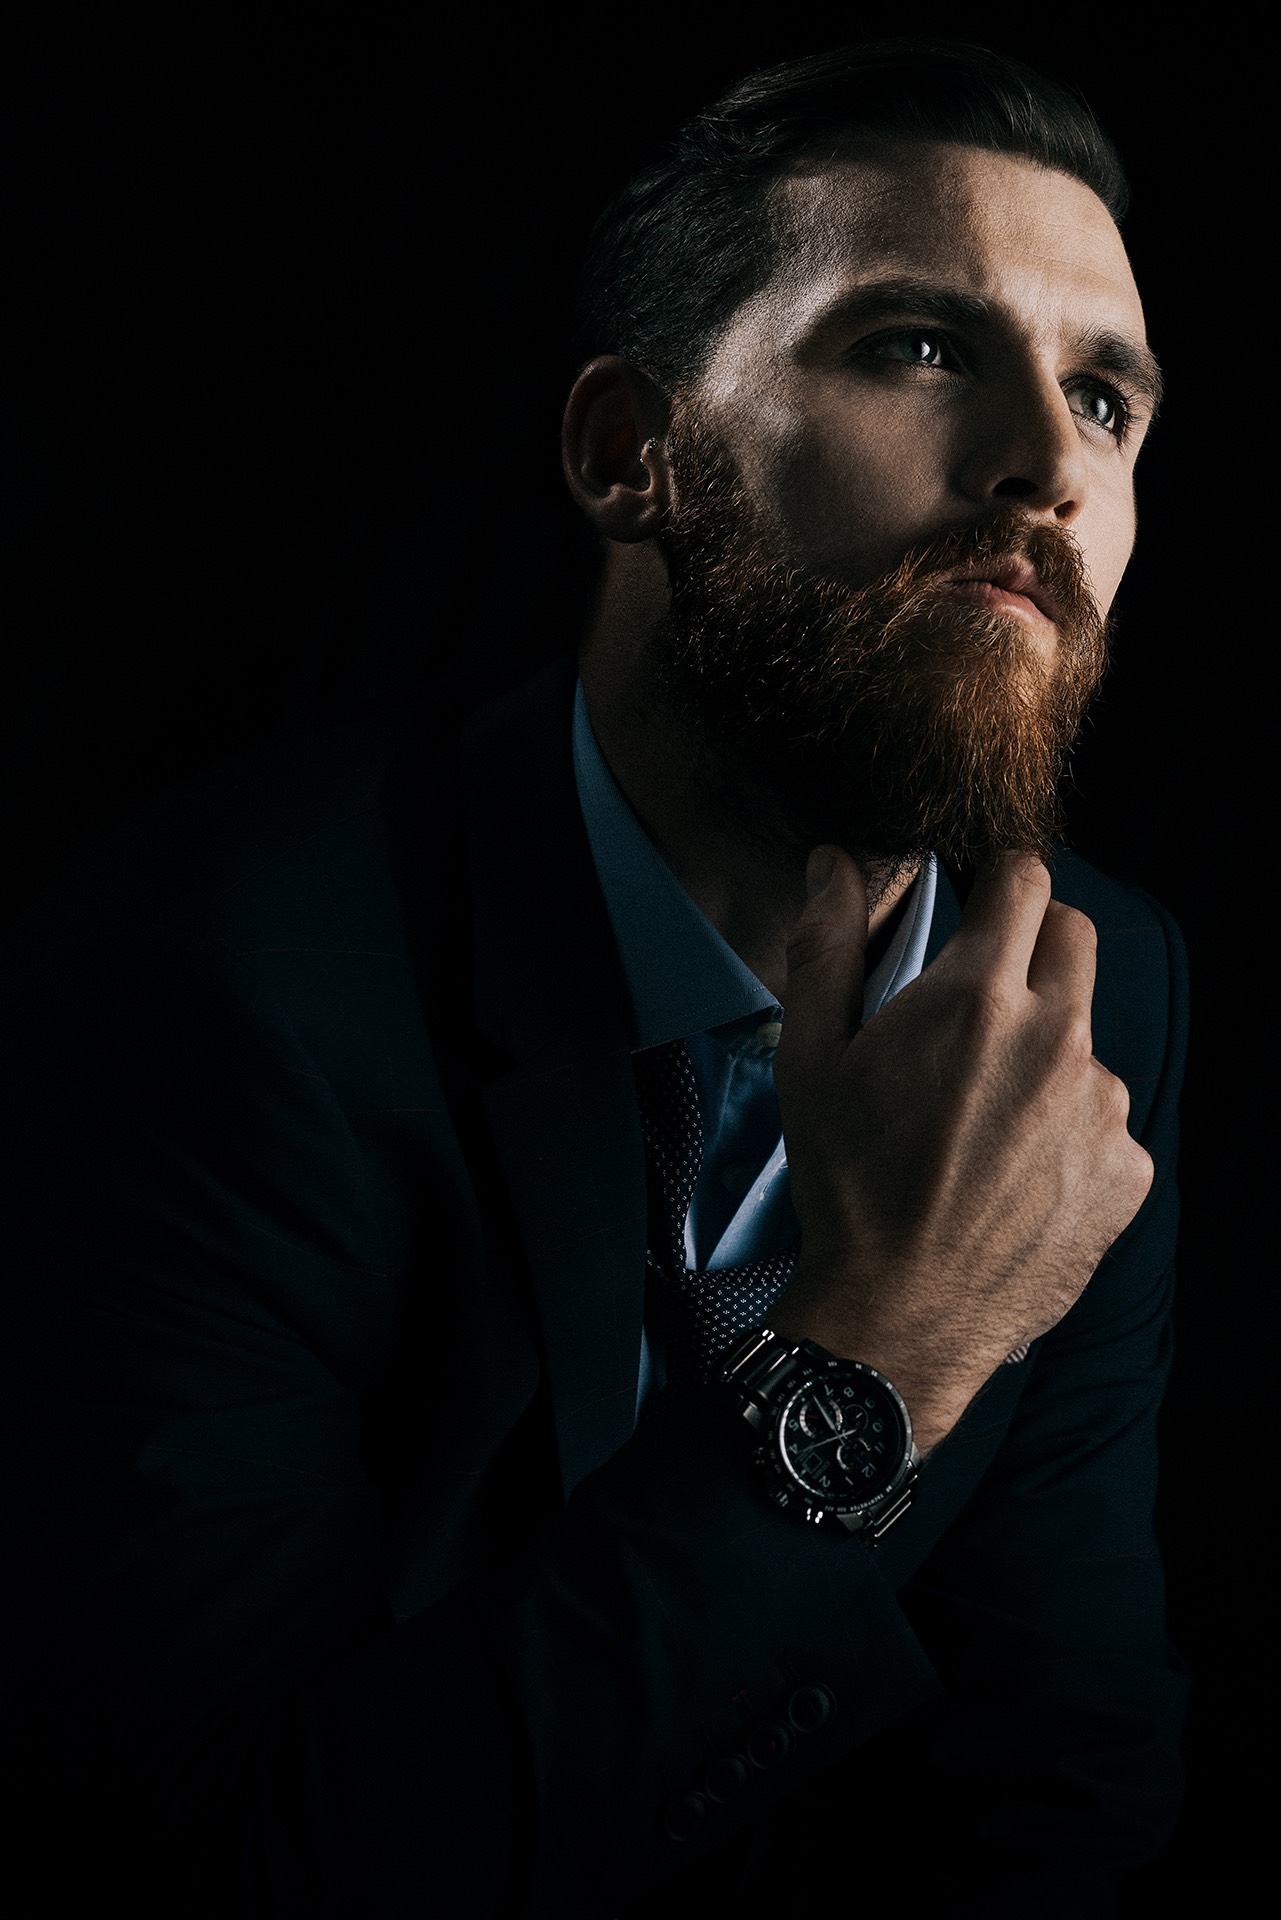 A business, editorial portrait in flash light.